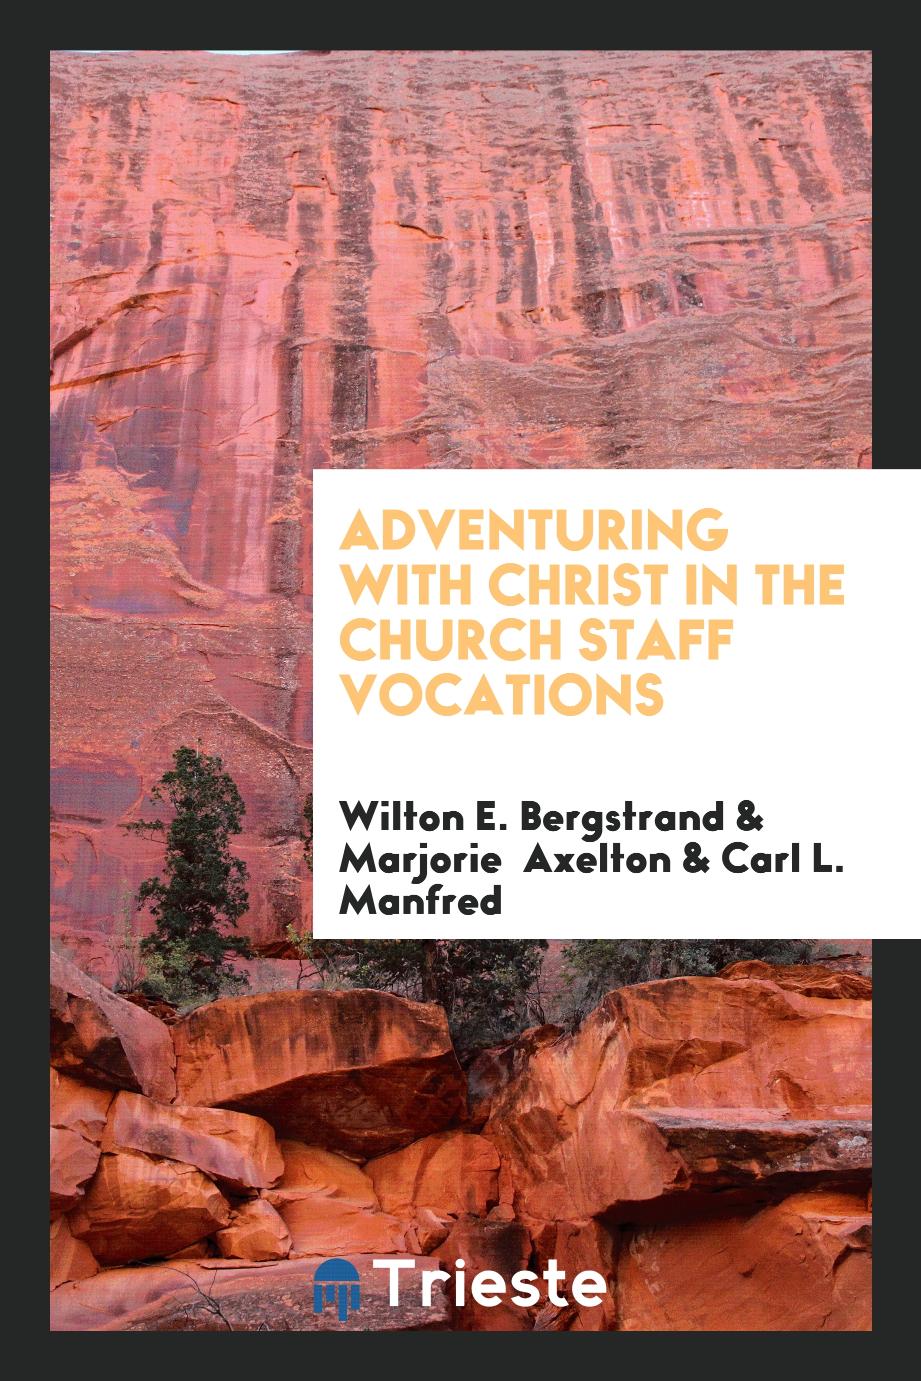 Adventuring with Christ in the church staff vocations